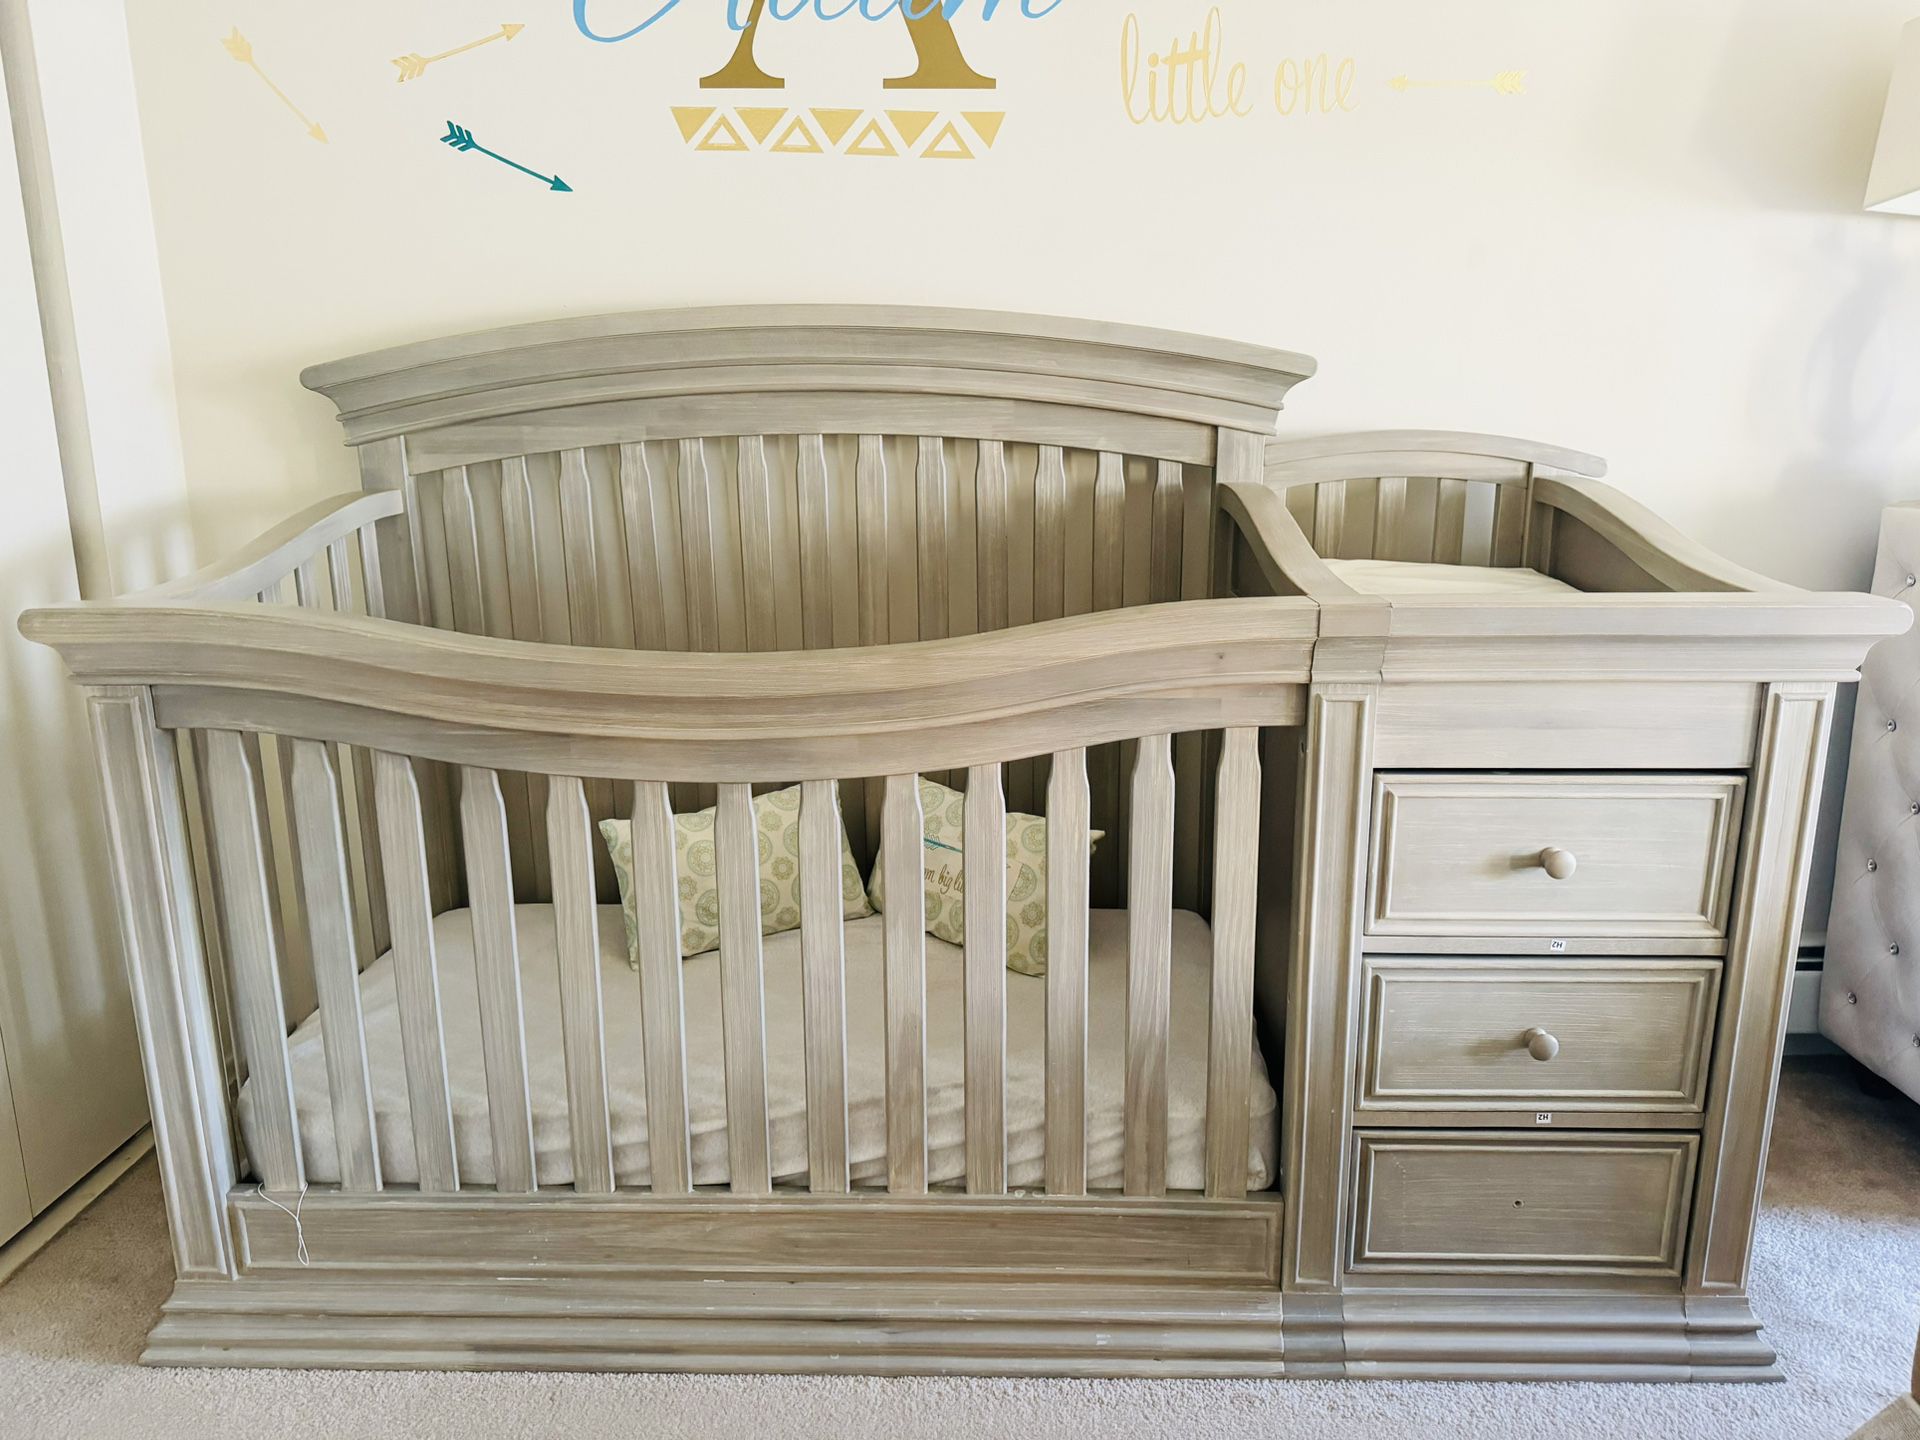 Sorelle Baby Crib With Changing Table. 3 Drawers and Extra Storage Space. Mattress Included